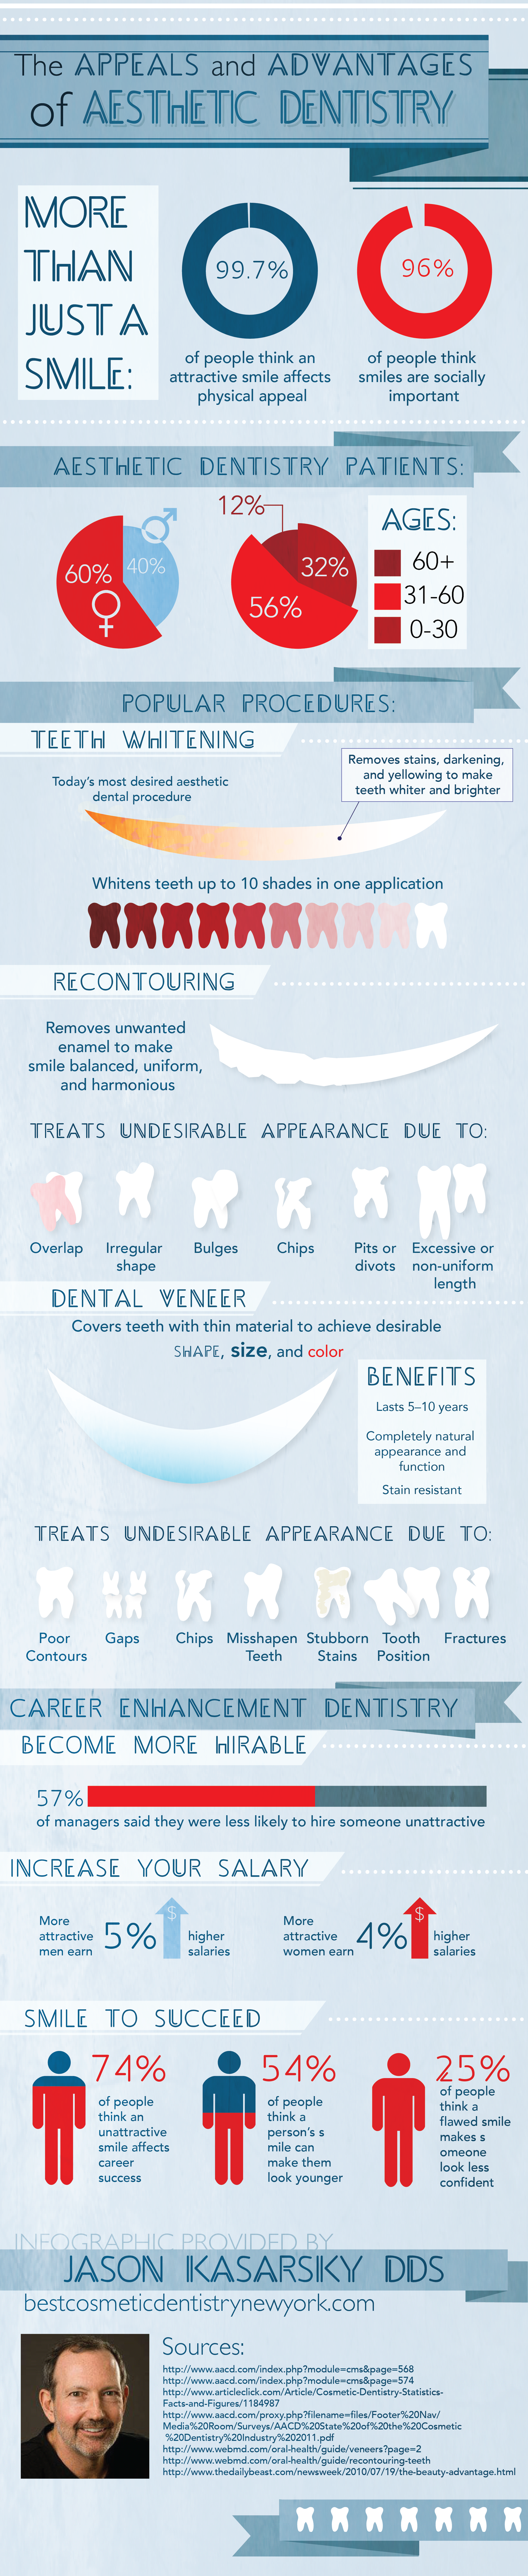 The Appeals and Advantages of Aesthetic Dentistry